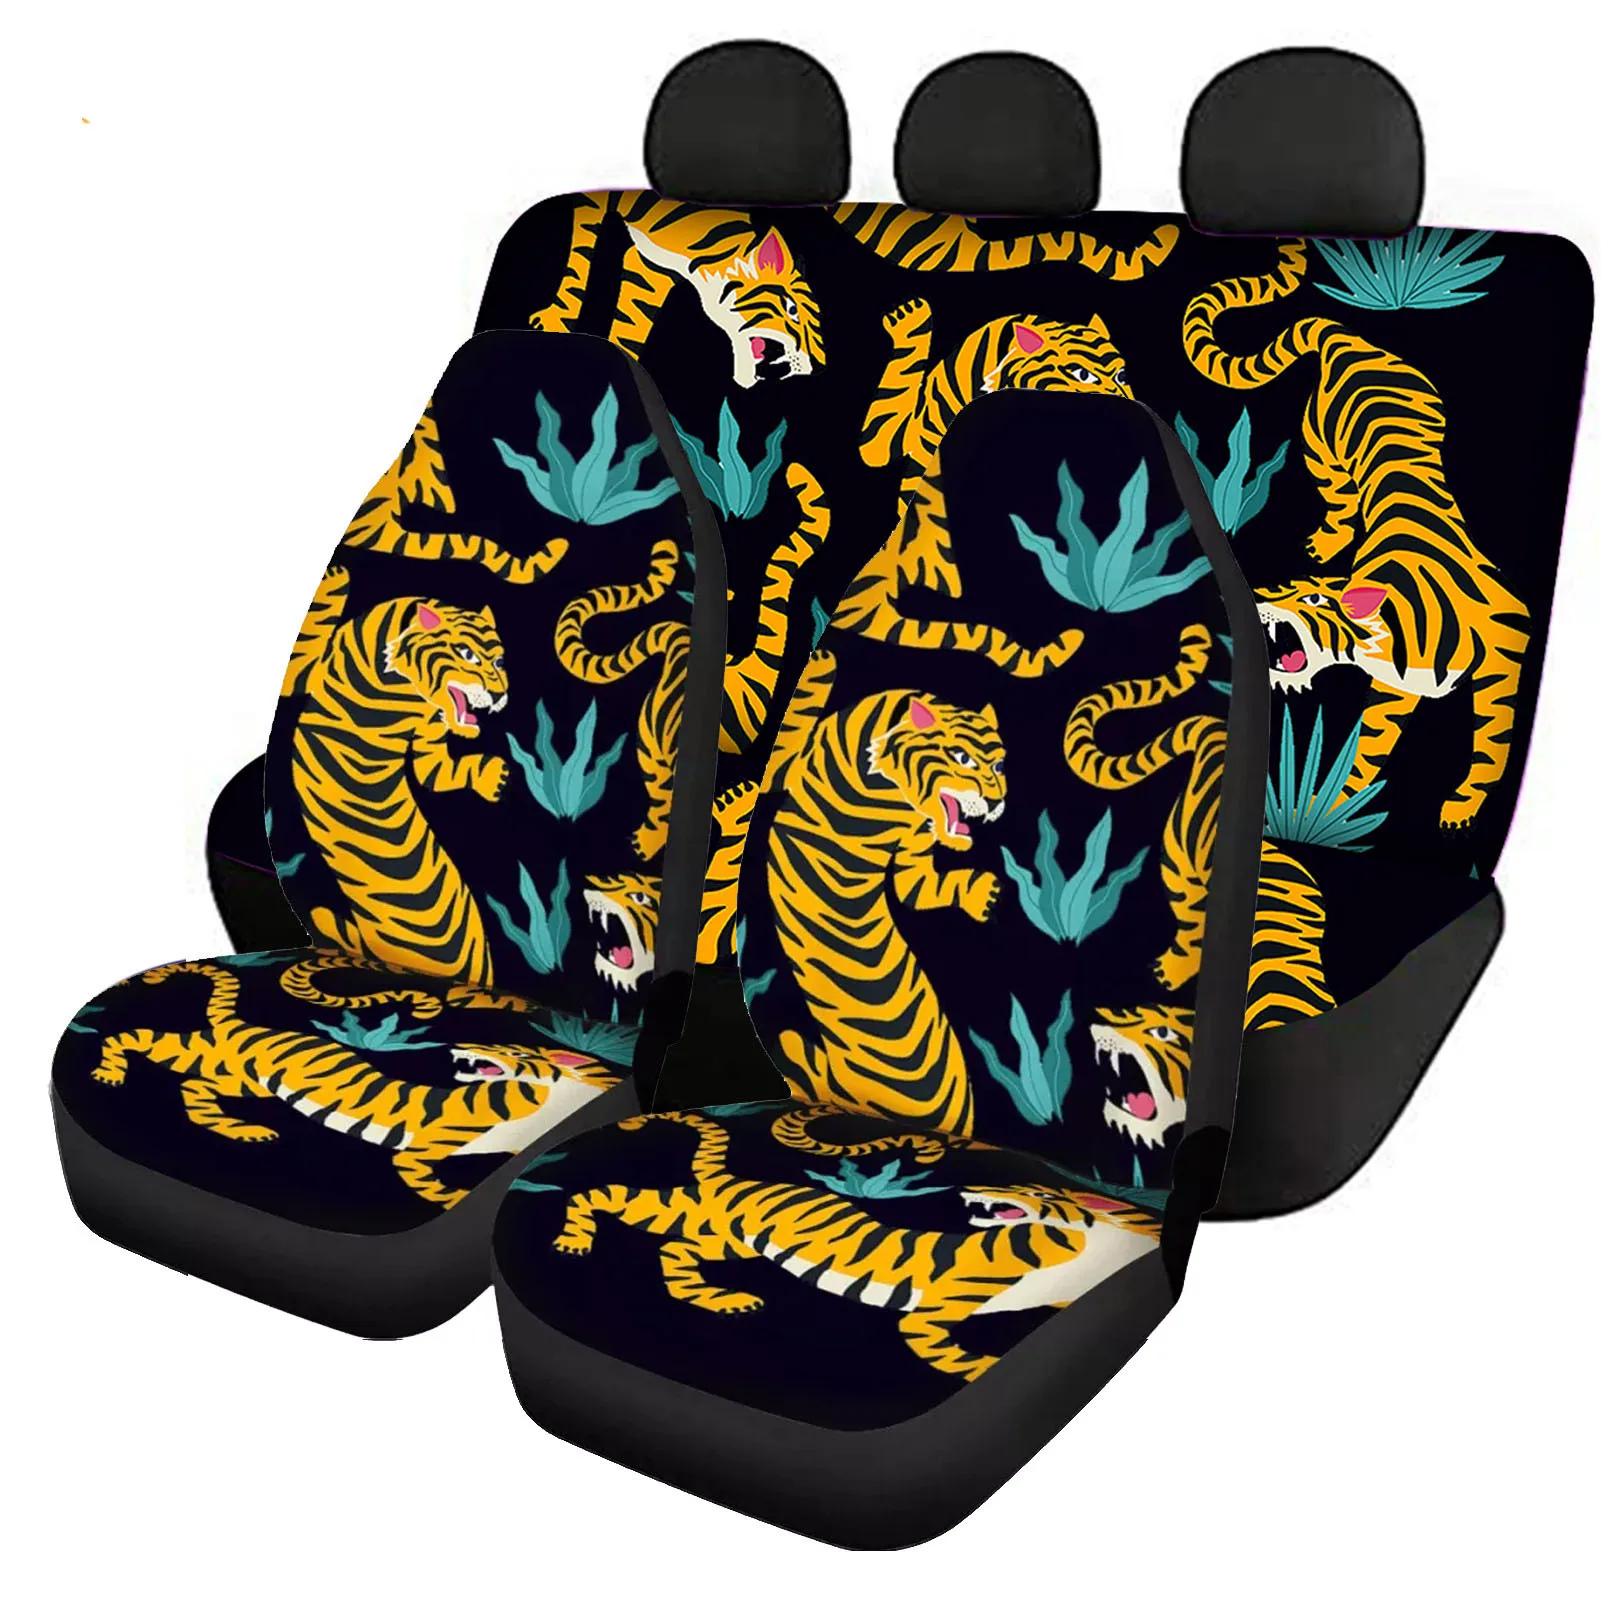 automotive-interior-accessories-auto-seat-cushion-covers-cool-tiger-pattern-print-front-and-rear-car-seat-cover-for-man-full-set